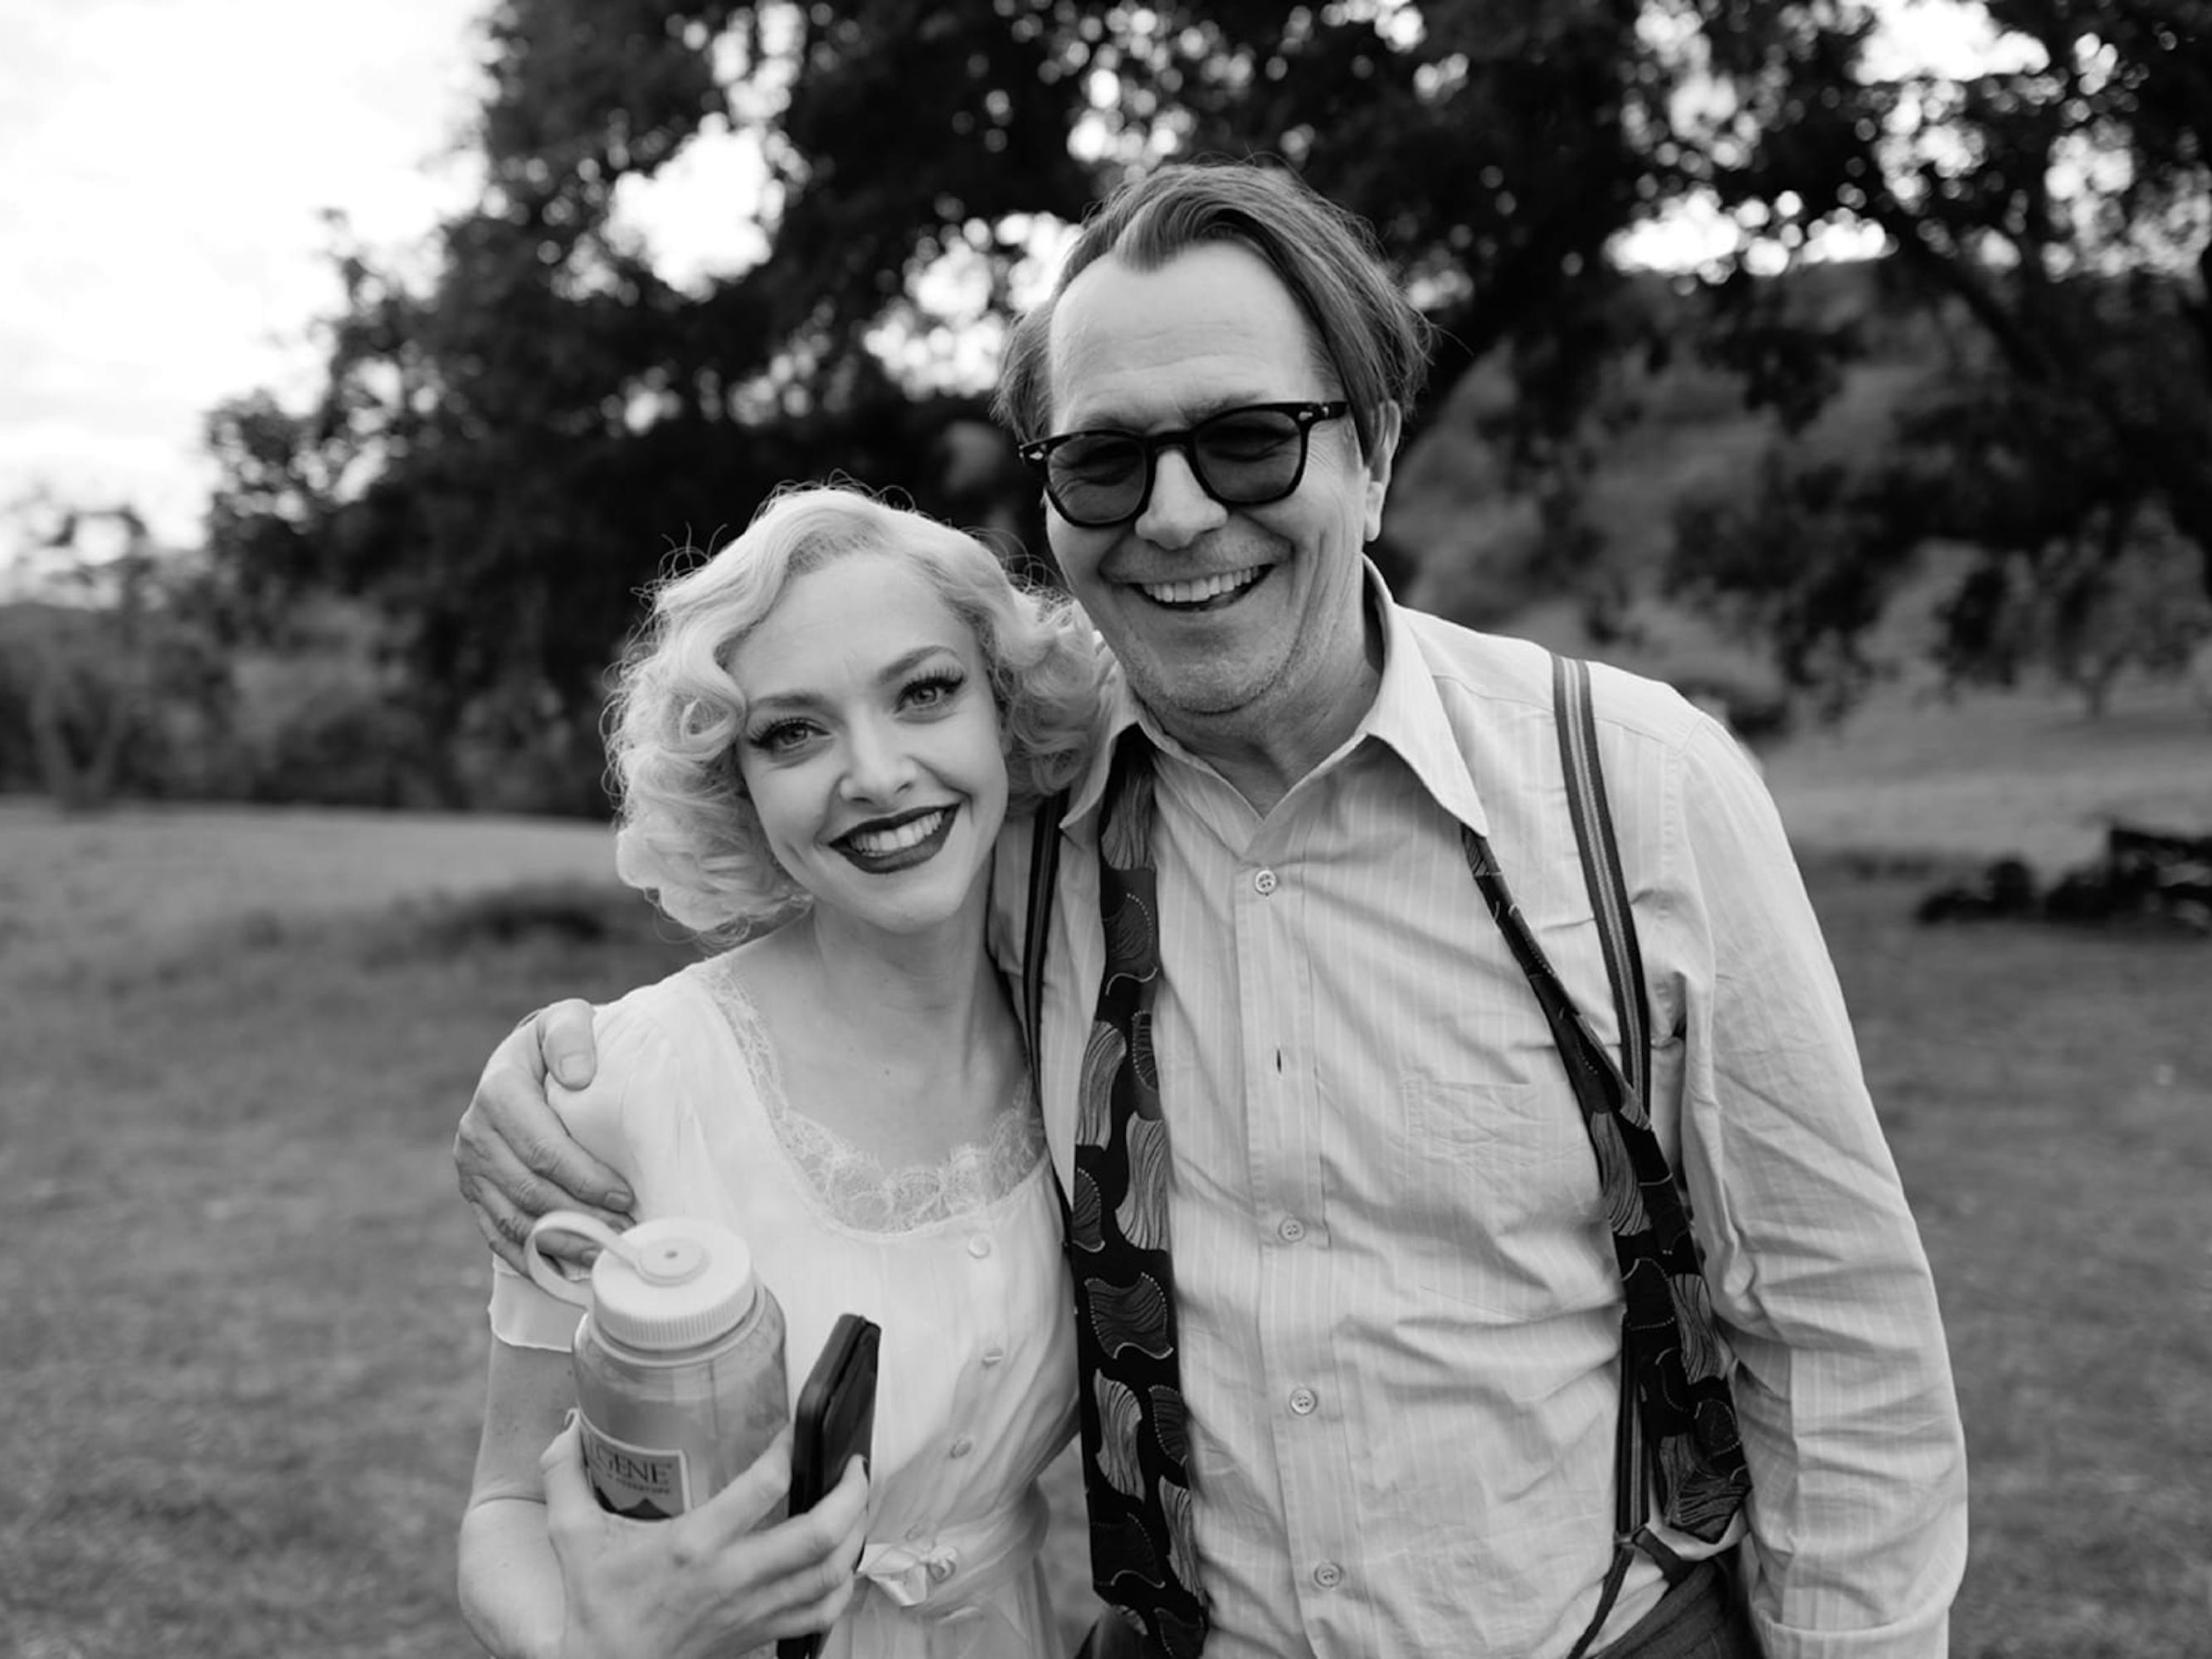 Seyfried and Oldman are pictured in costume outside, with grass, hills, and trees behind them. They have their arms around each other and are smiling. With her blonde hair and lined eyes Seyfried is the picture of Marion Davies, but the cellphone and Nalgene water bottle in her hand give it away.